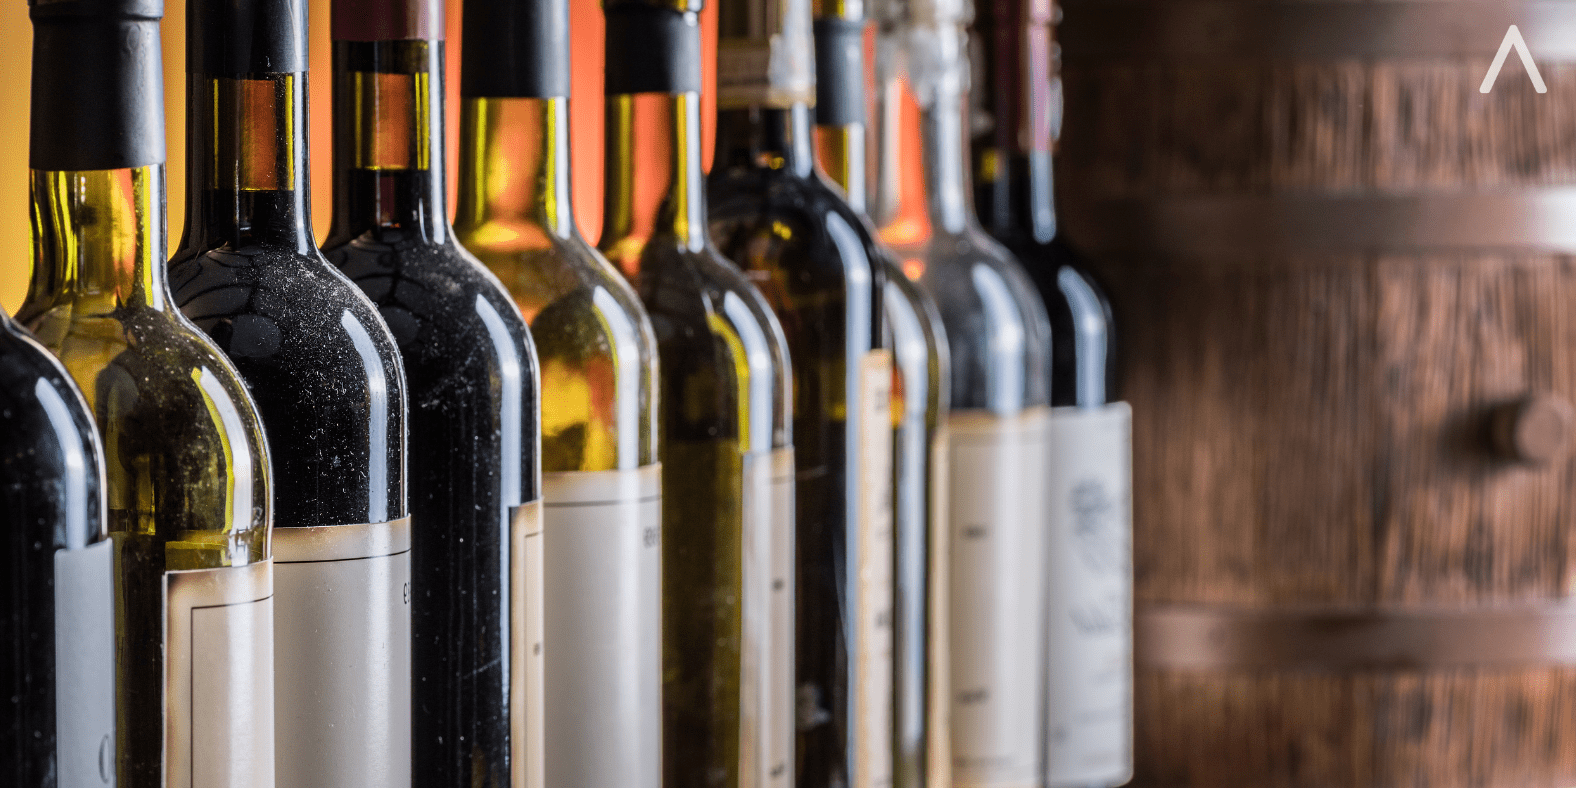 Finally, it’s wine o’clock for customers of bankrupt wine seller